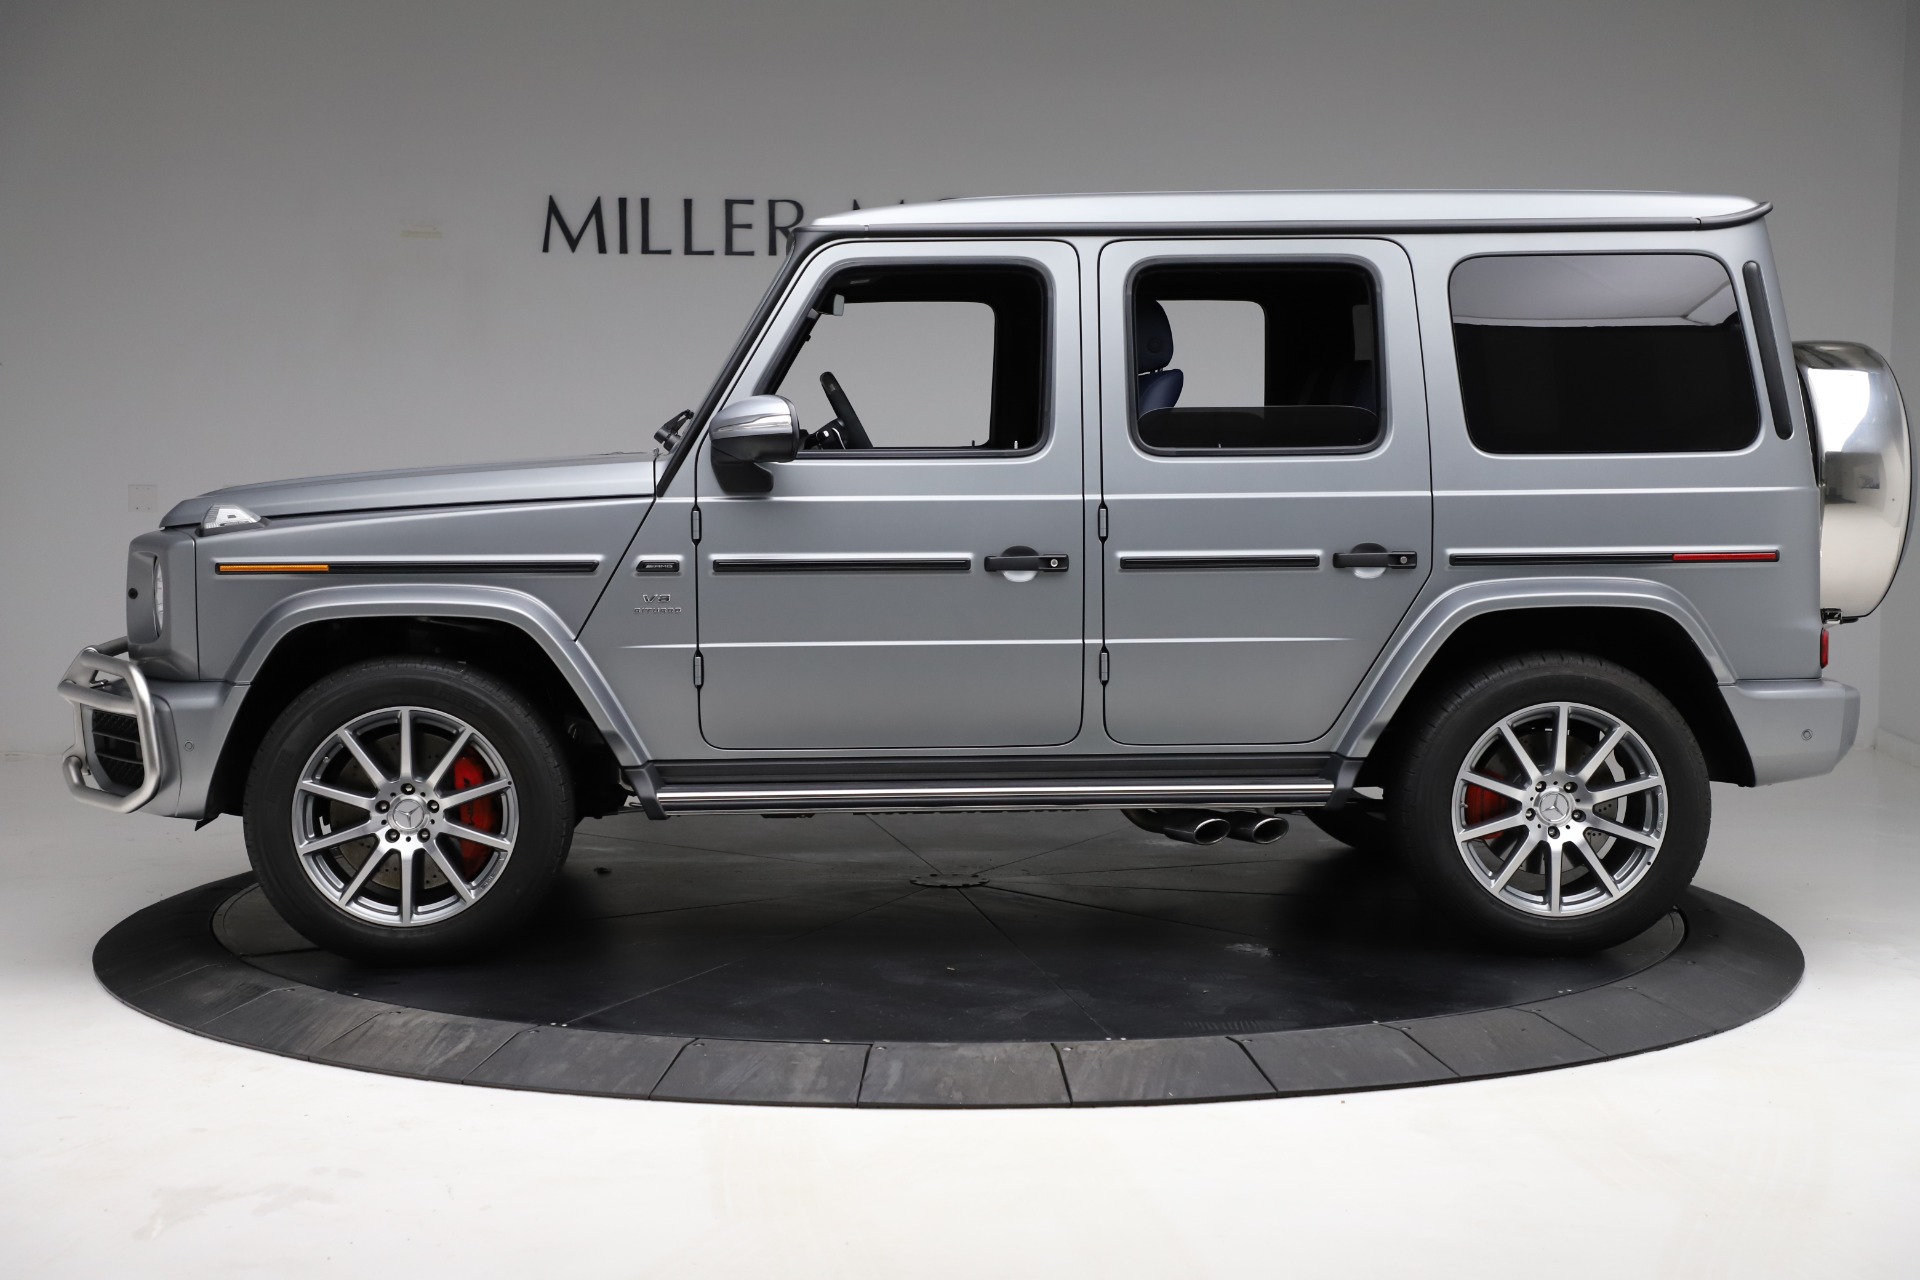 Pre Owned 21 Mercedes Benz G Class Amg G 63 For Sale Miller Motorcars Stock 8102c